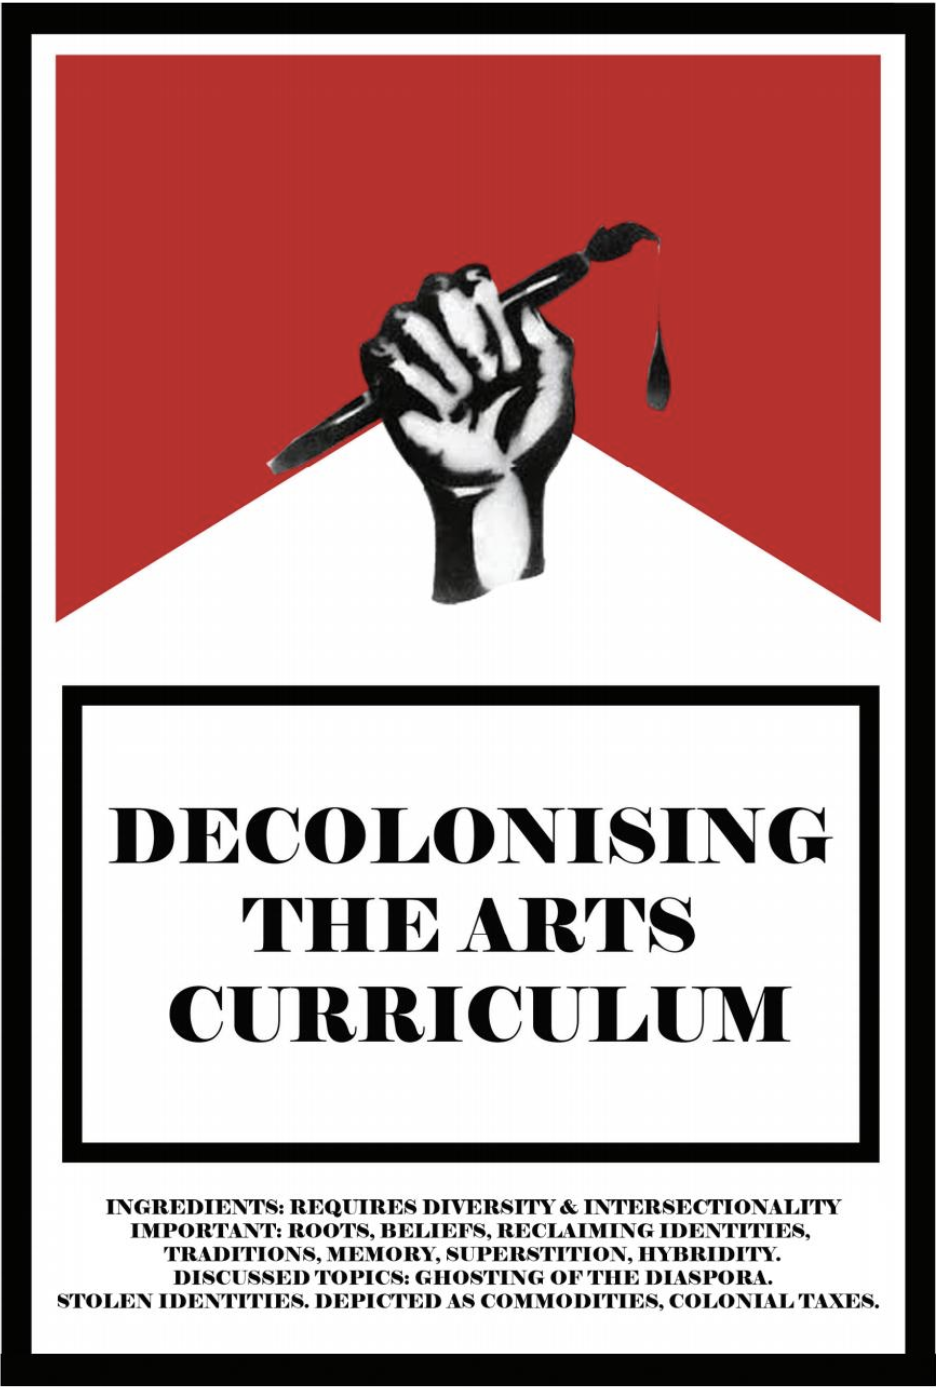 DECOLONISING THE ARTS CURRICULUM: THOUGHTS ON HIGHER EDUCATION